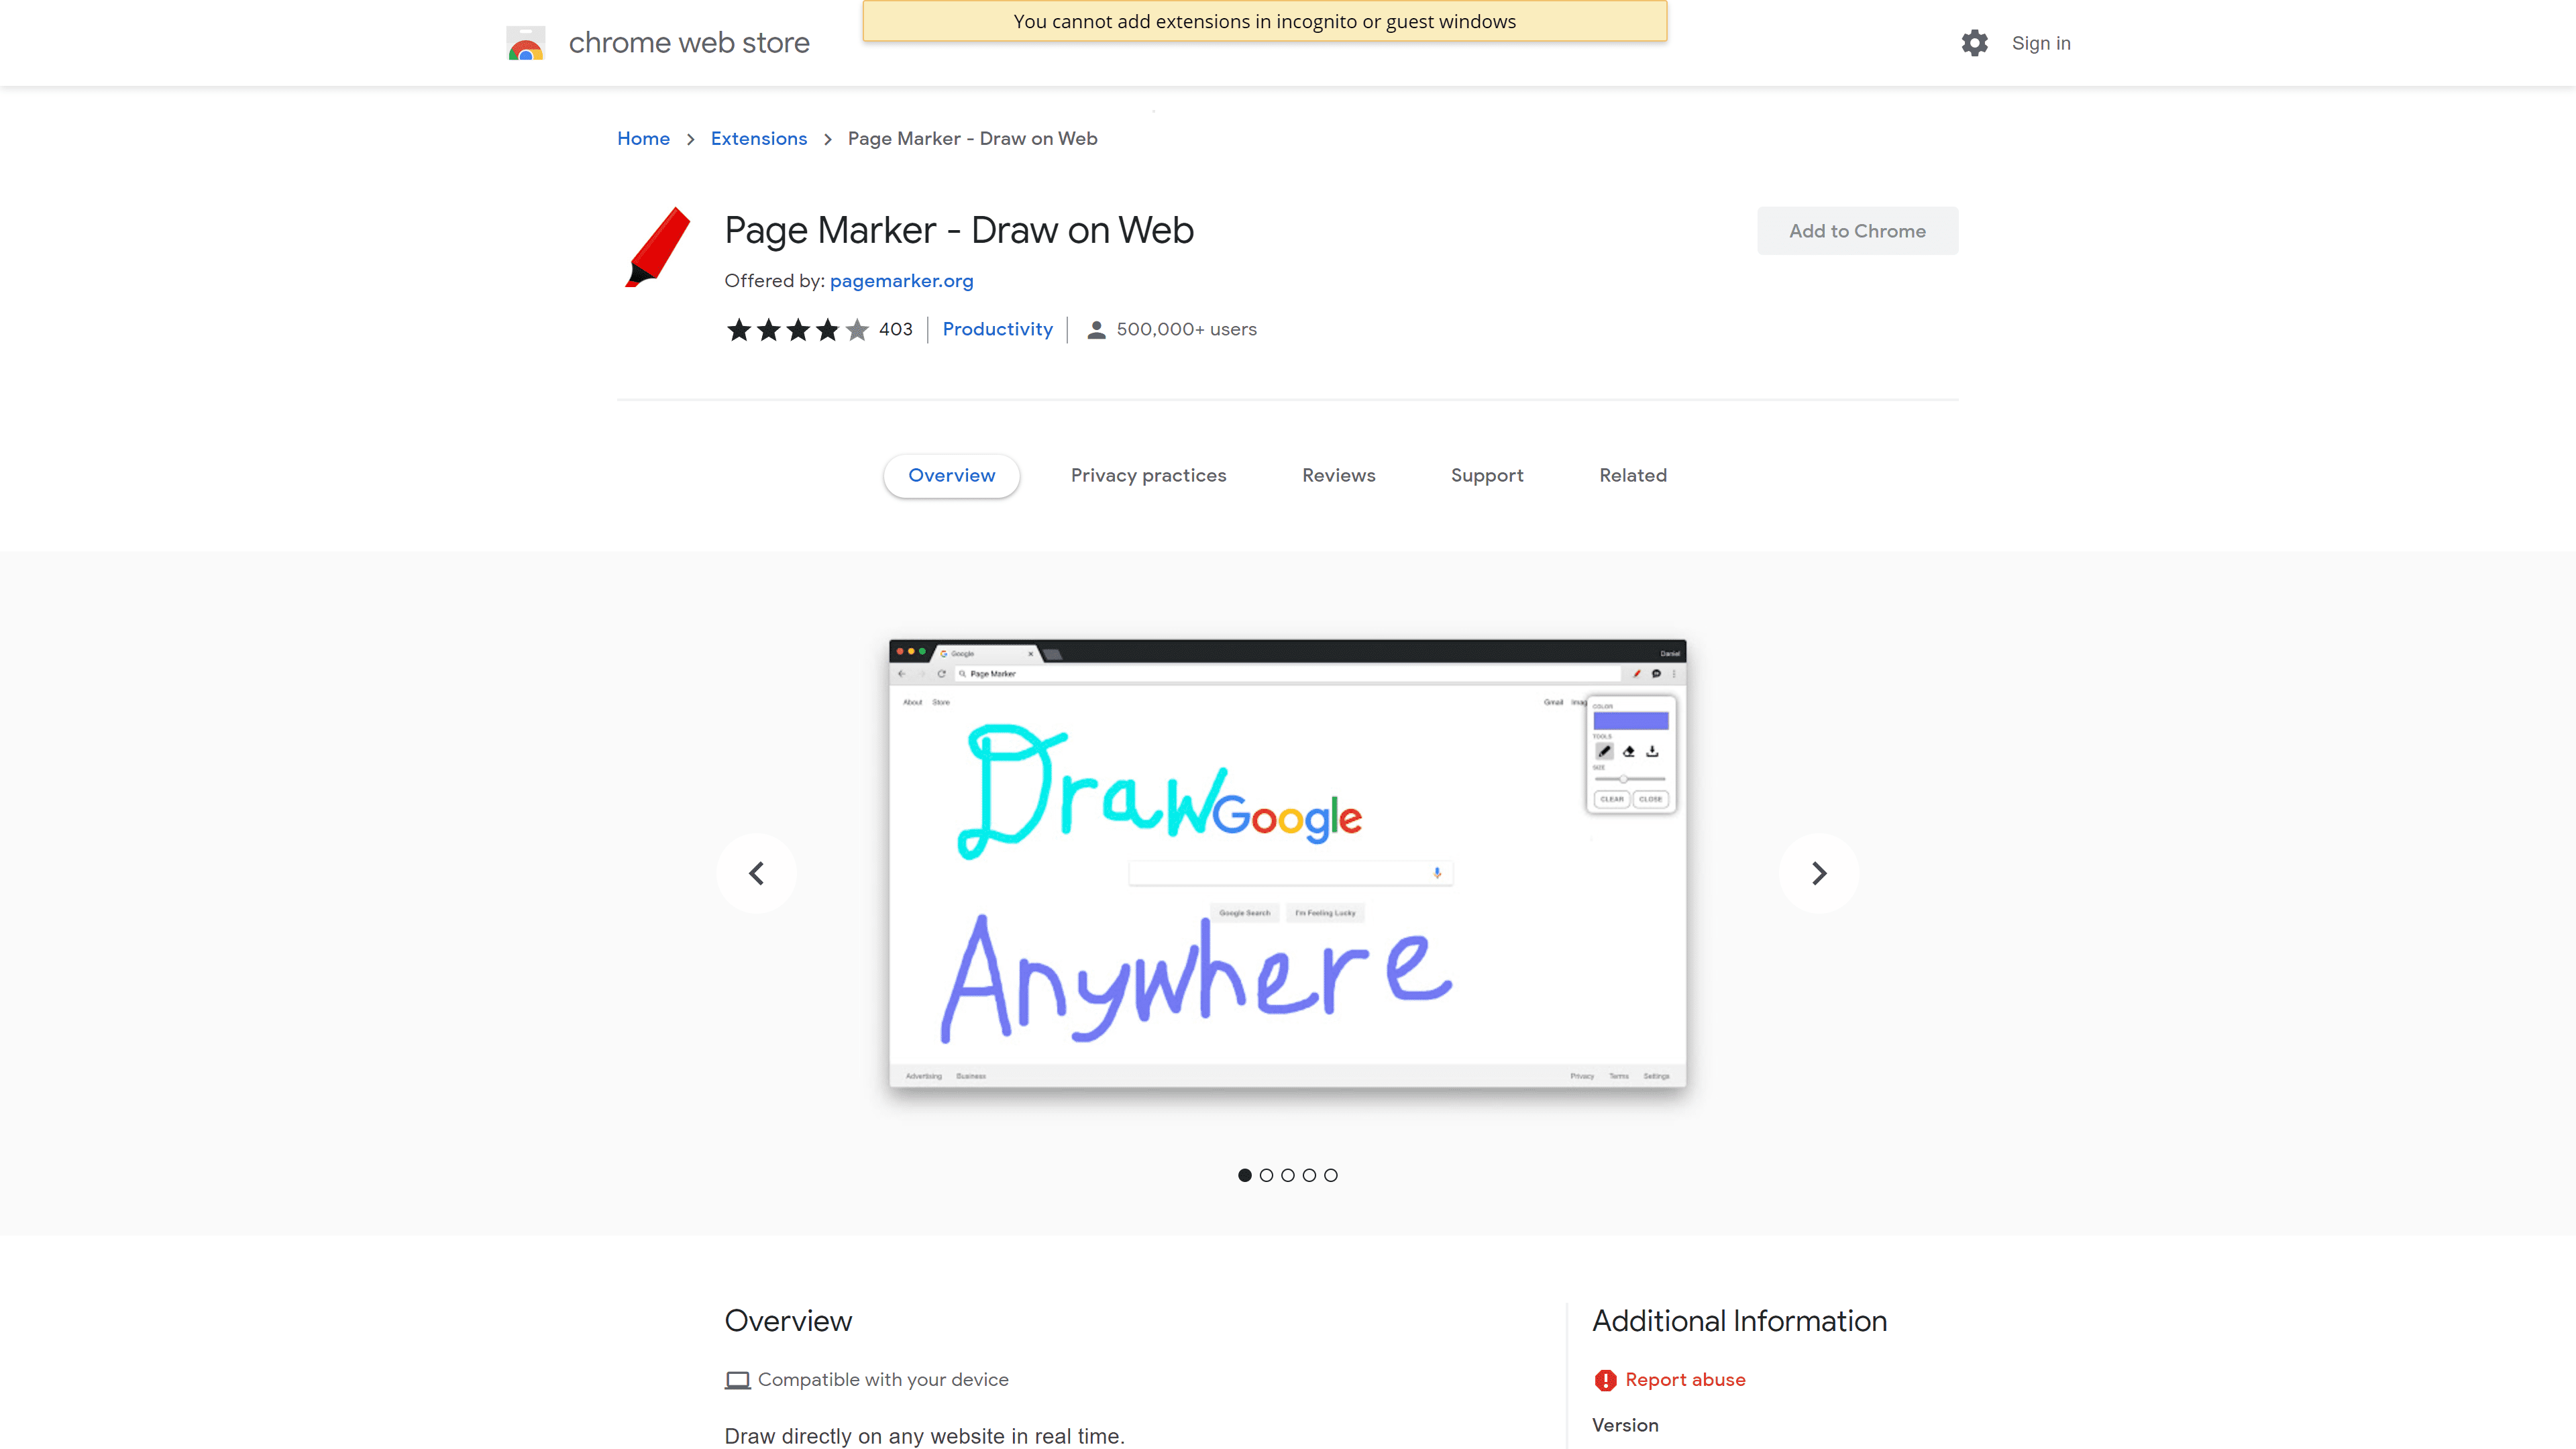 Page Marker – Draw on Web